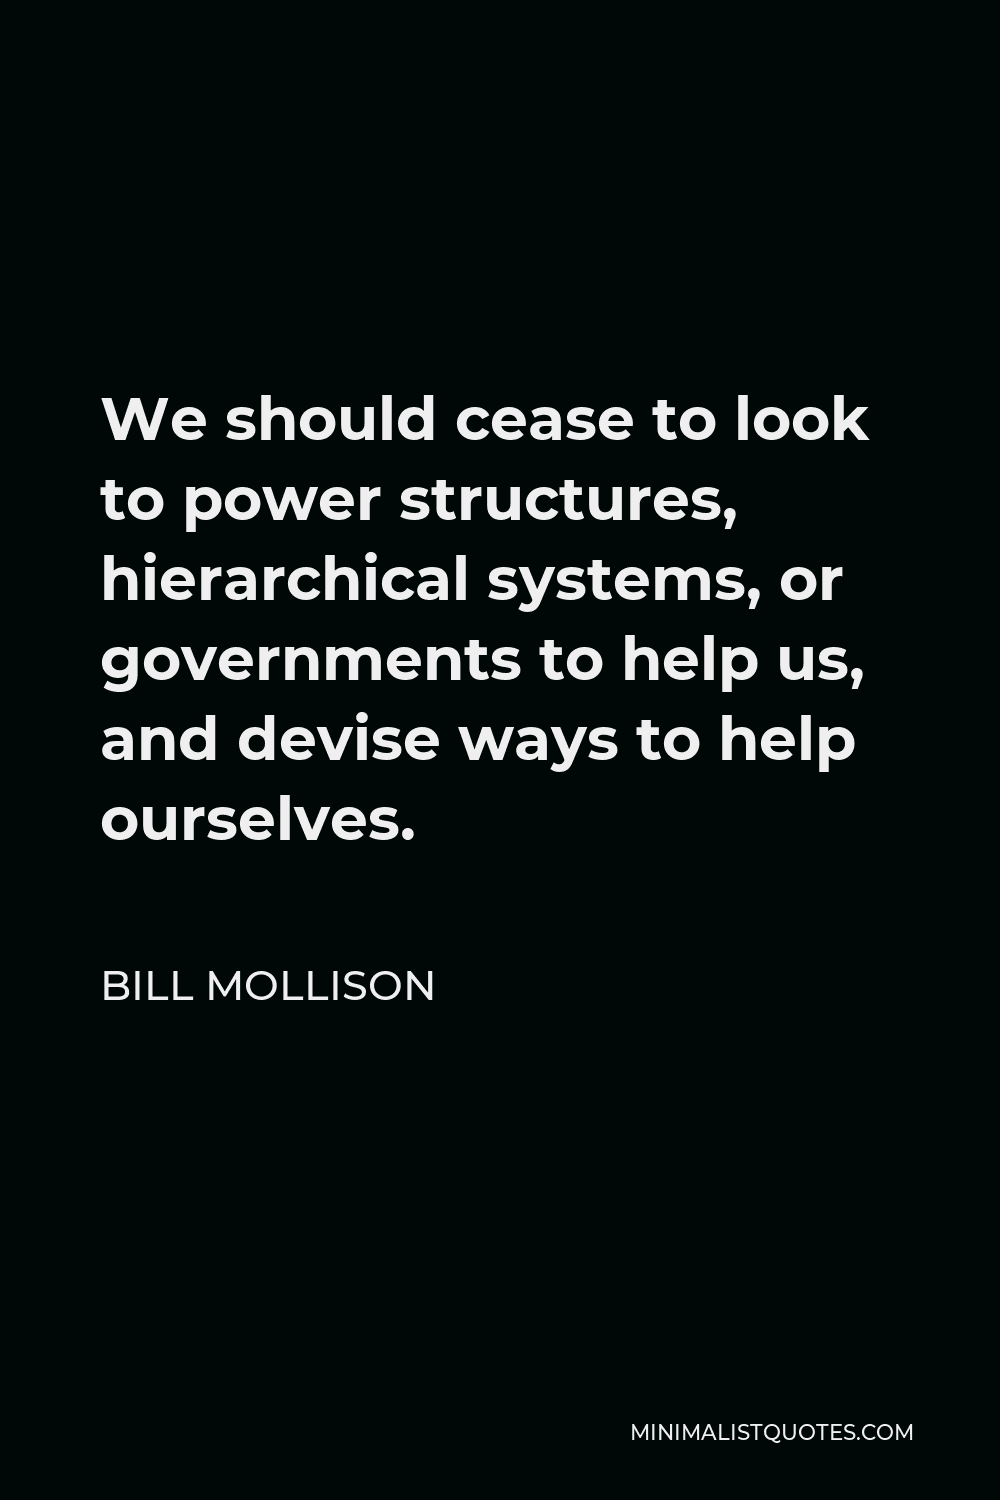 Bill Mollison Quote - We should cease to look to power structures, hierarchical systems, or governments to help us, and devise ways to help ourselves.